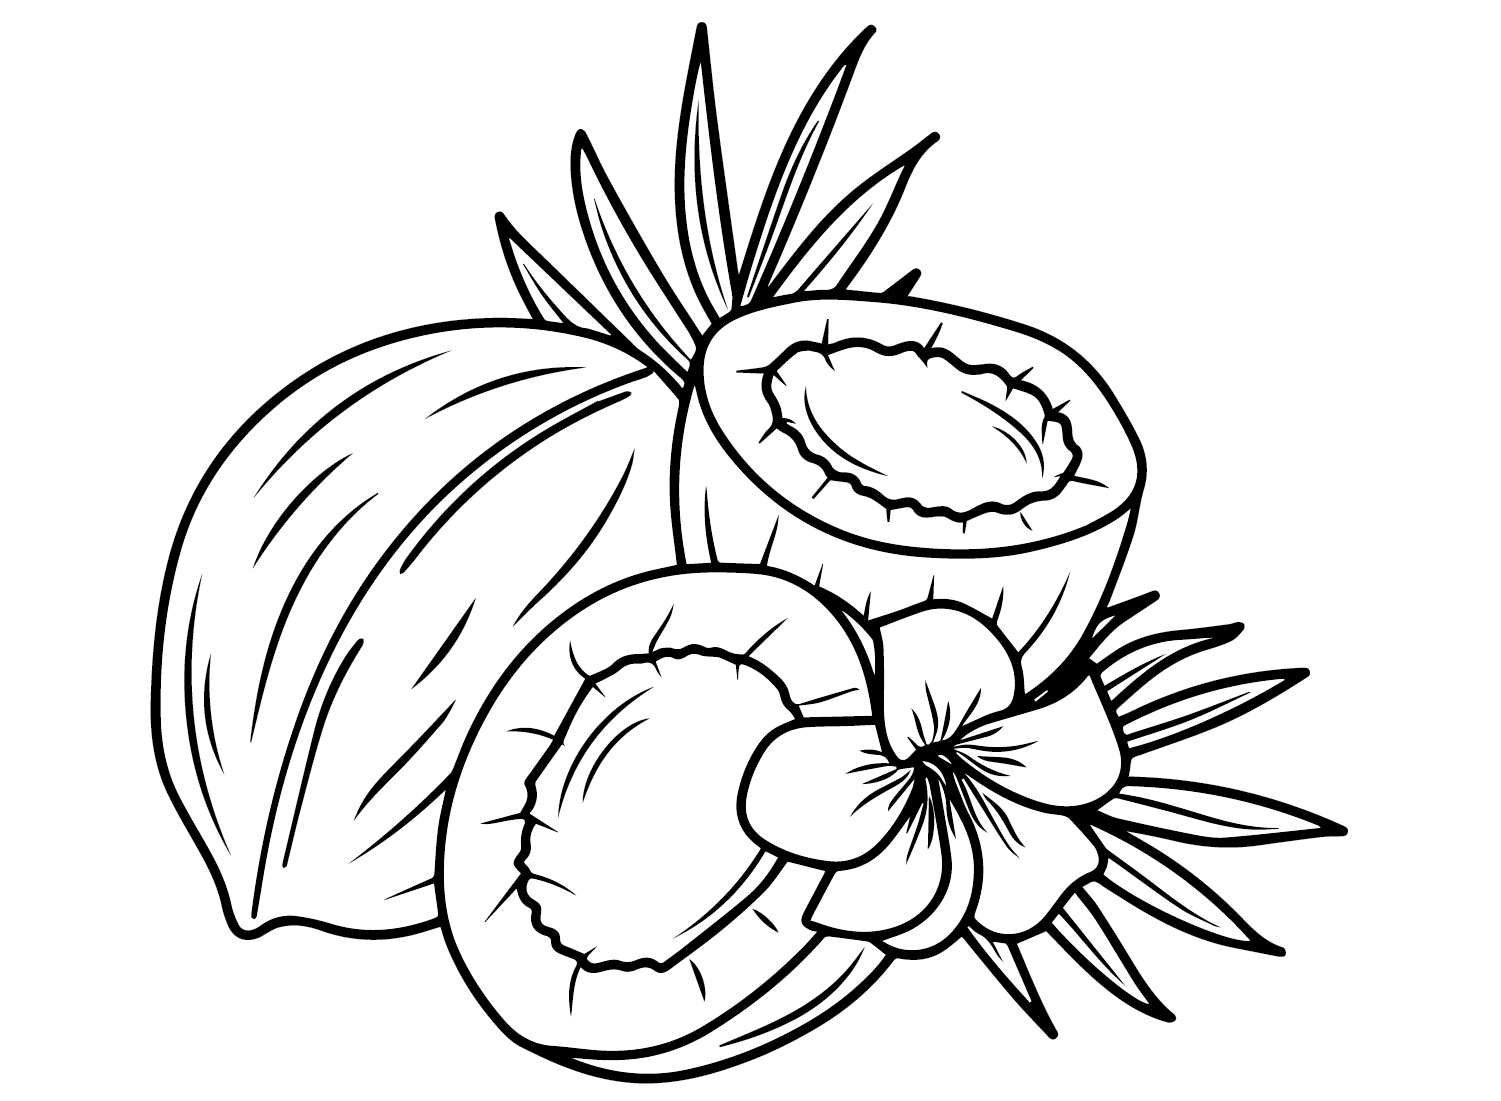 Coconut and Flower Coloring Page